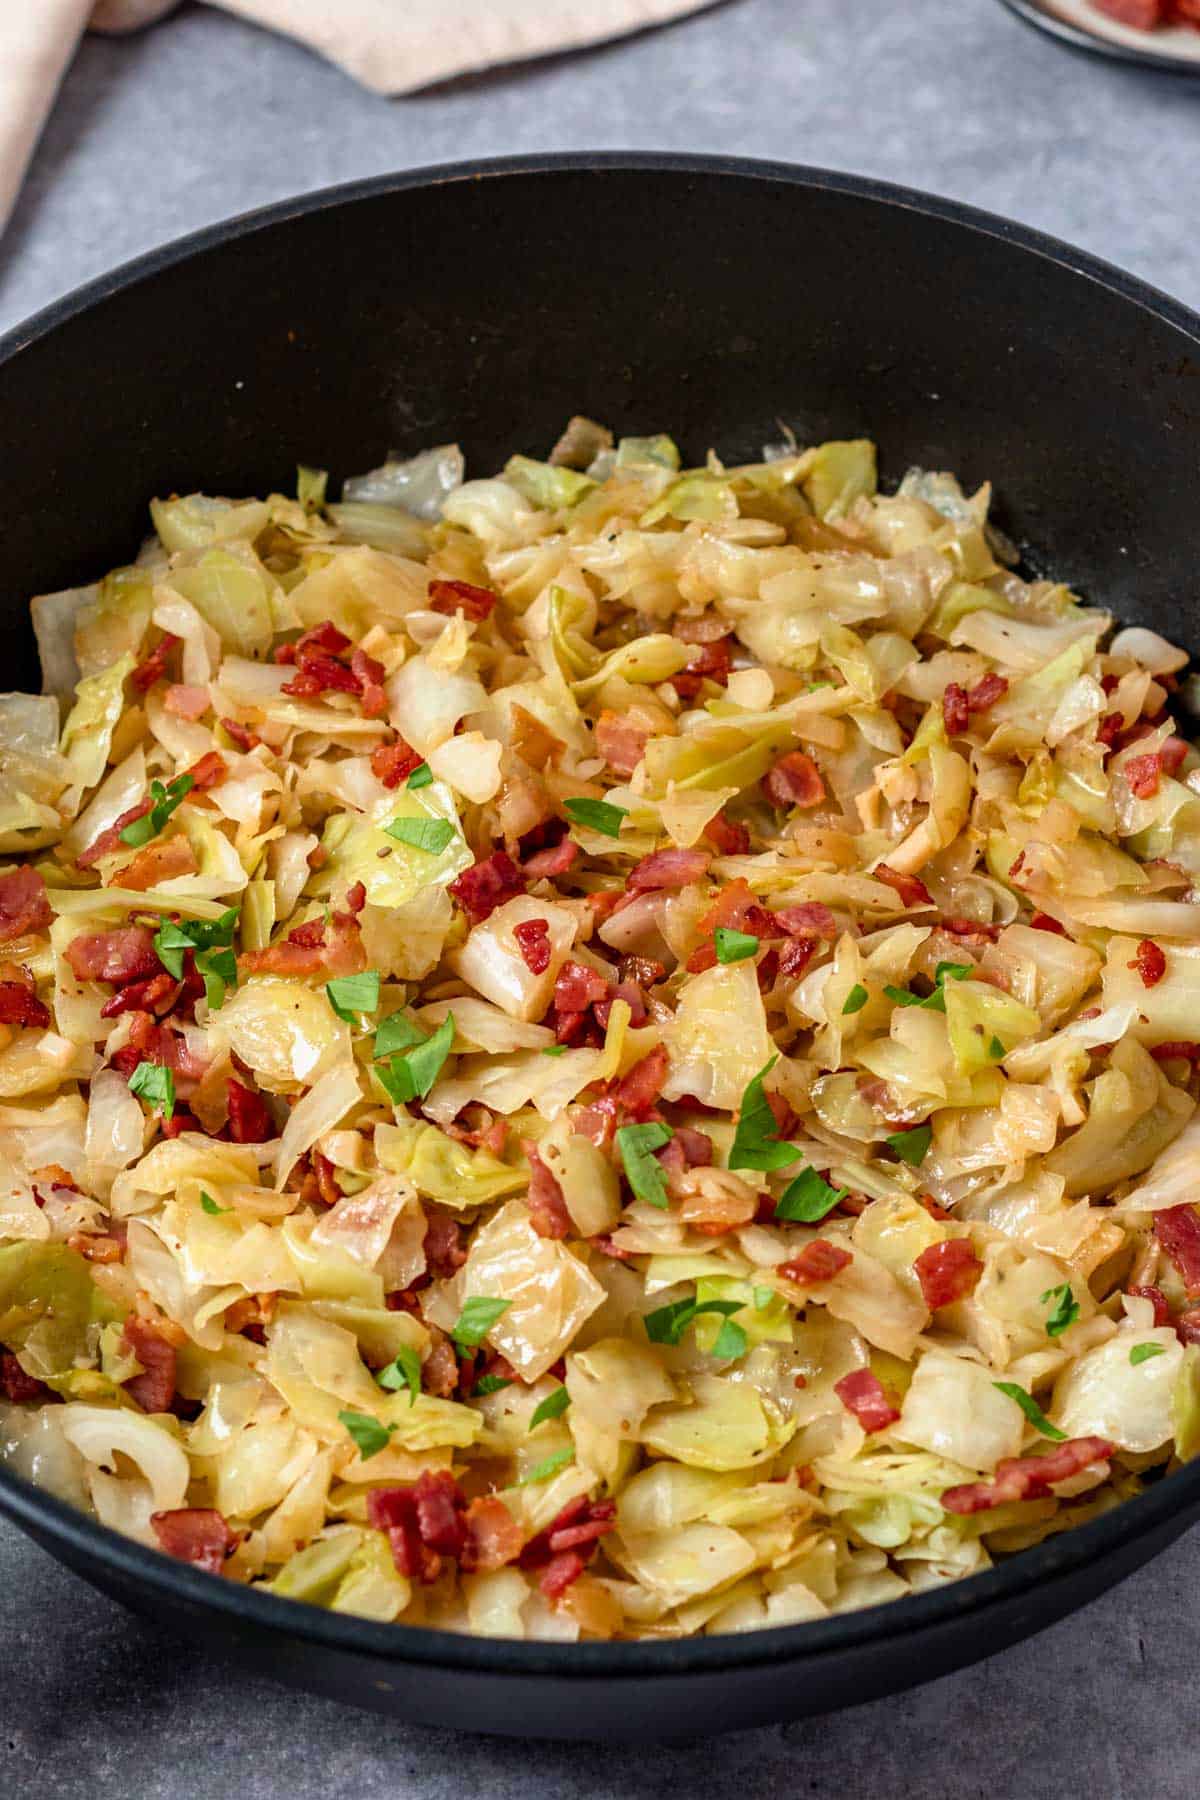 Fried Cabbage With Bacon